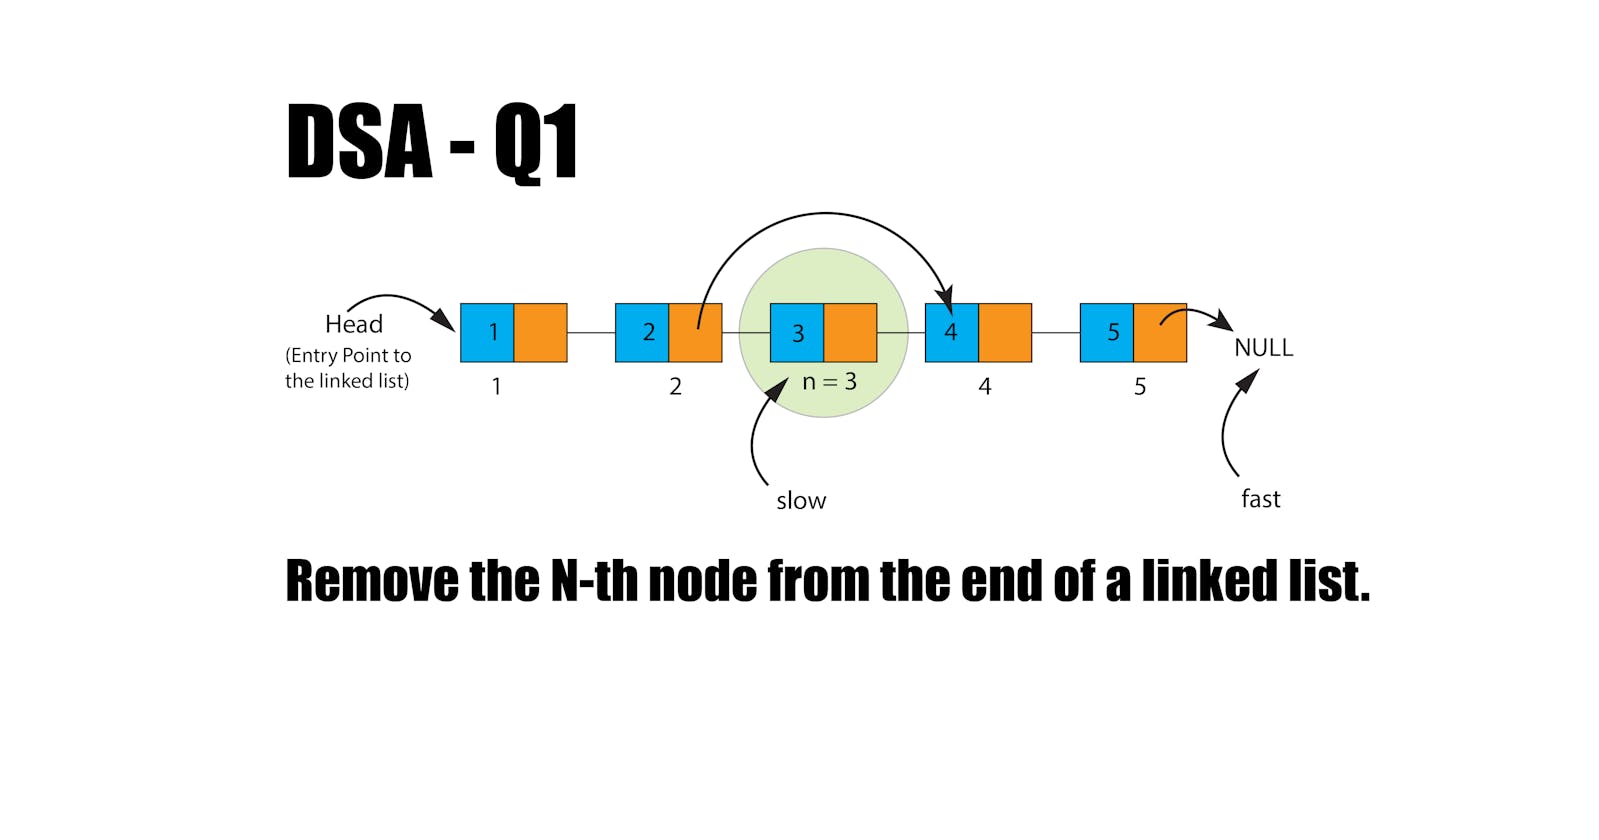 Remove the N-th node from the end of a linked list